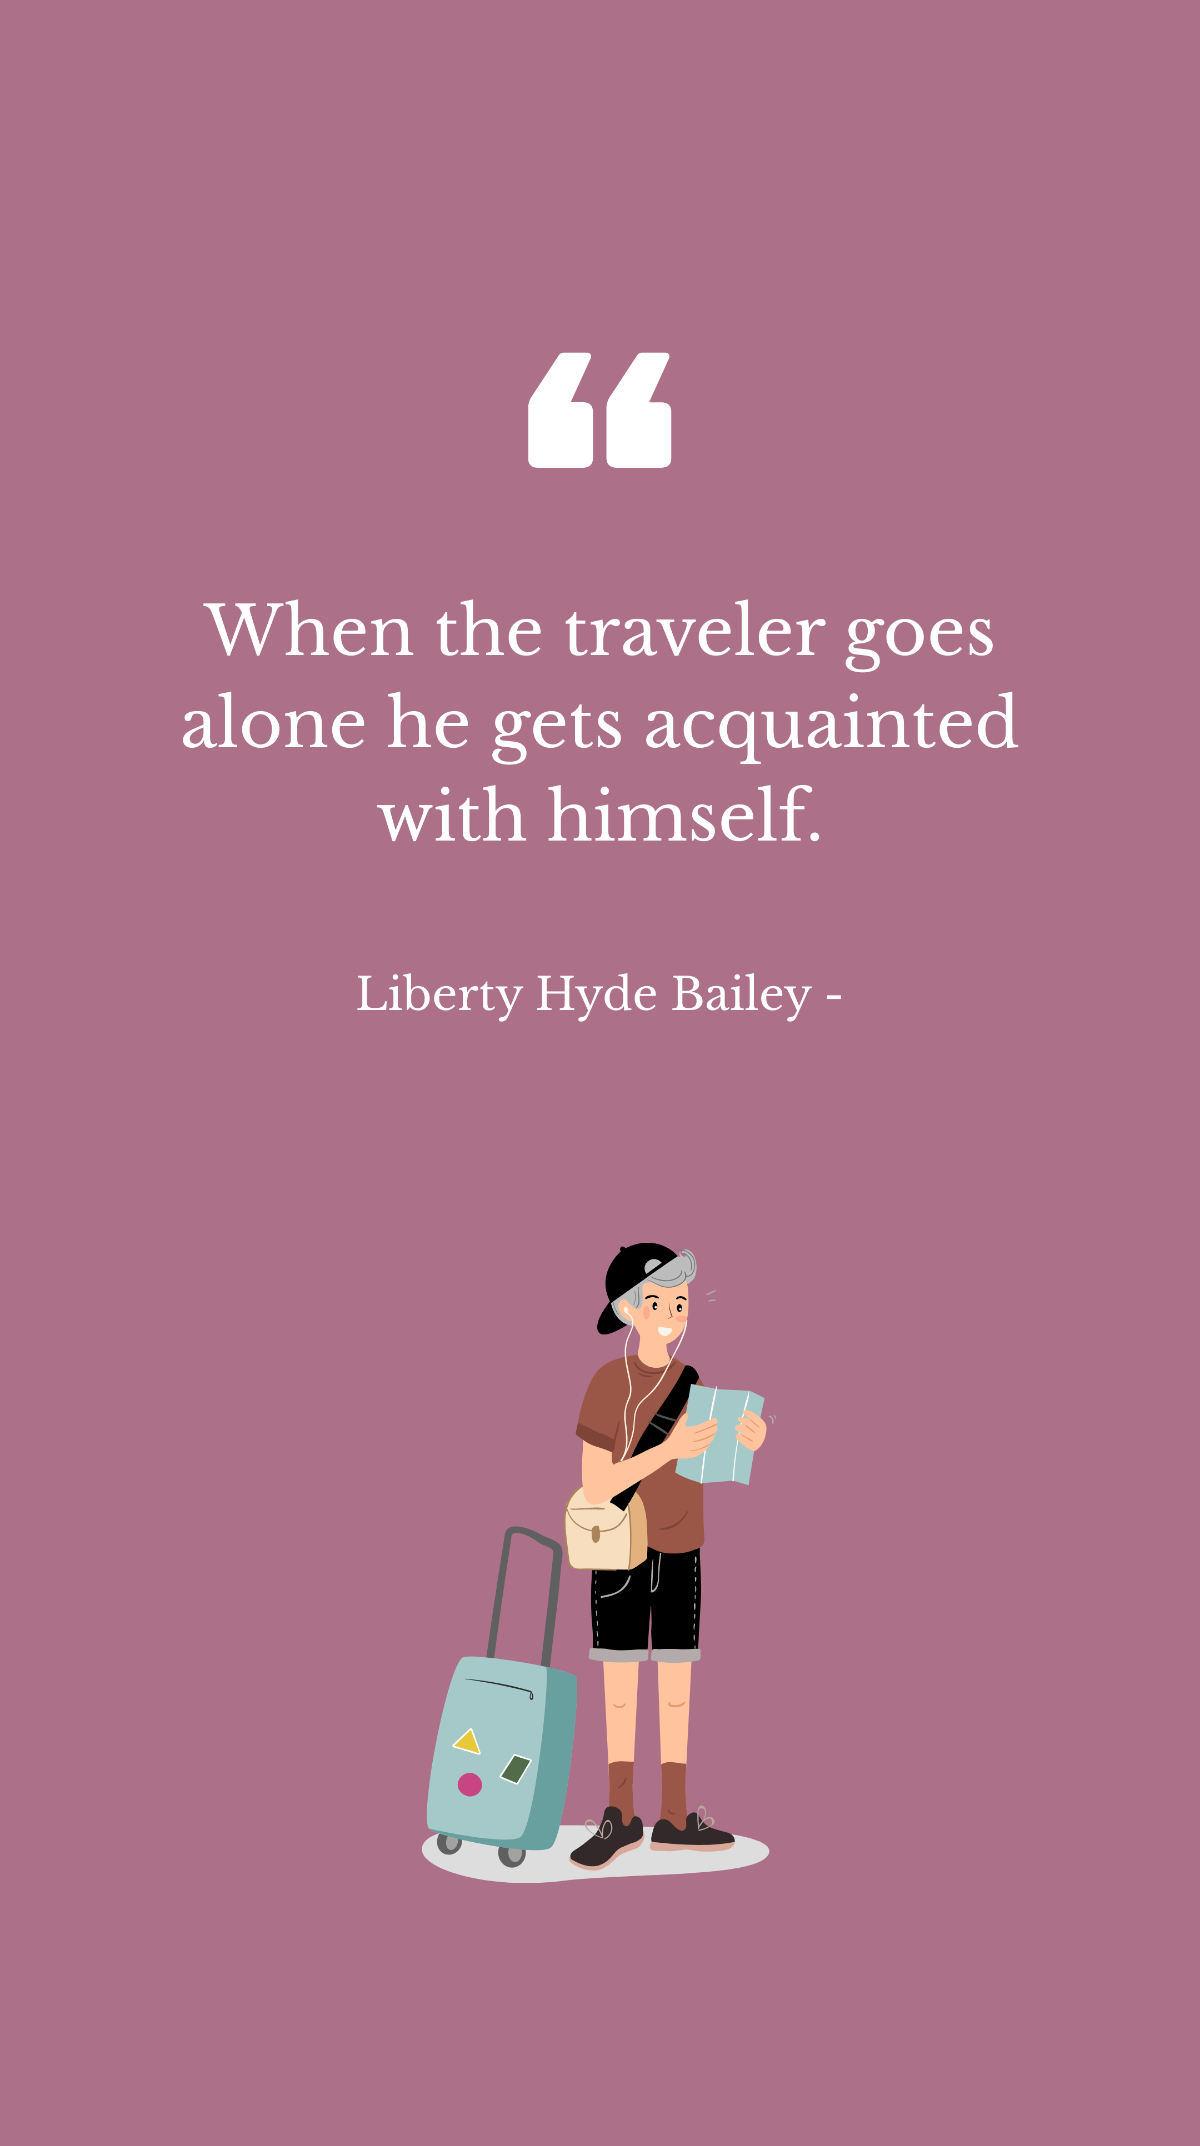 Liberty Hyde Bailey - When the traveler goes alone he gets acquainted with himself.